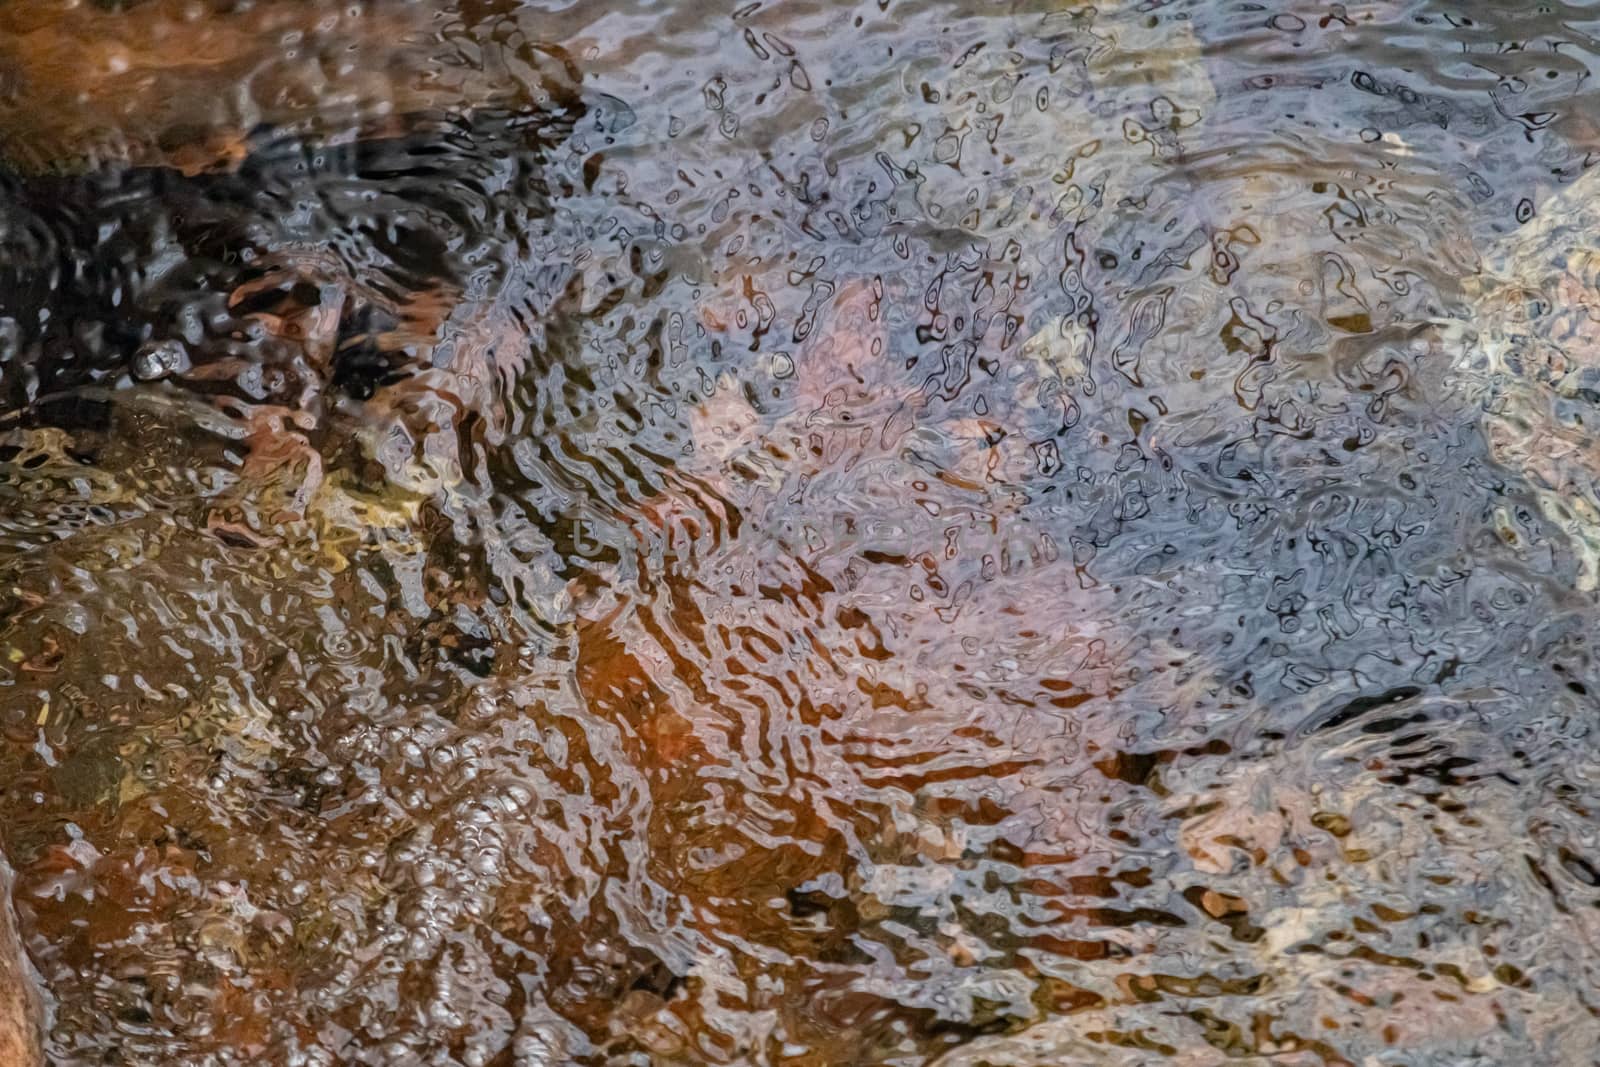 Water ripples in a small stream as it flows over brown and reddish rocks below. The transparent surface shows the shape and texture of the water's surface.